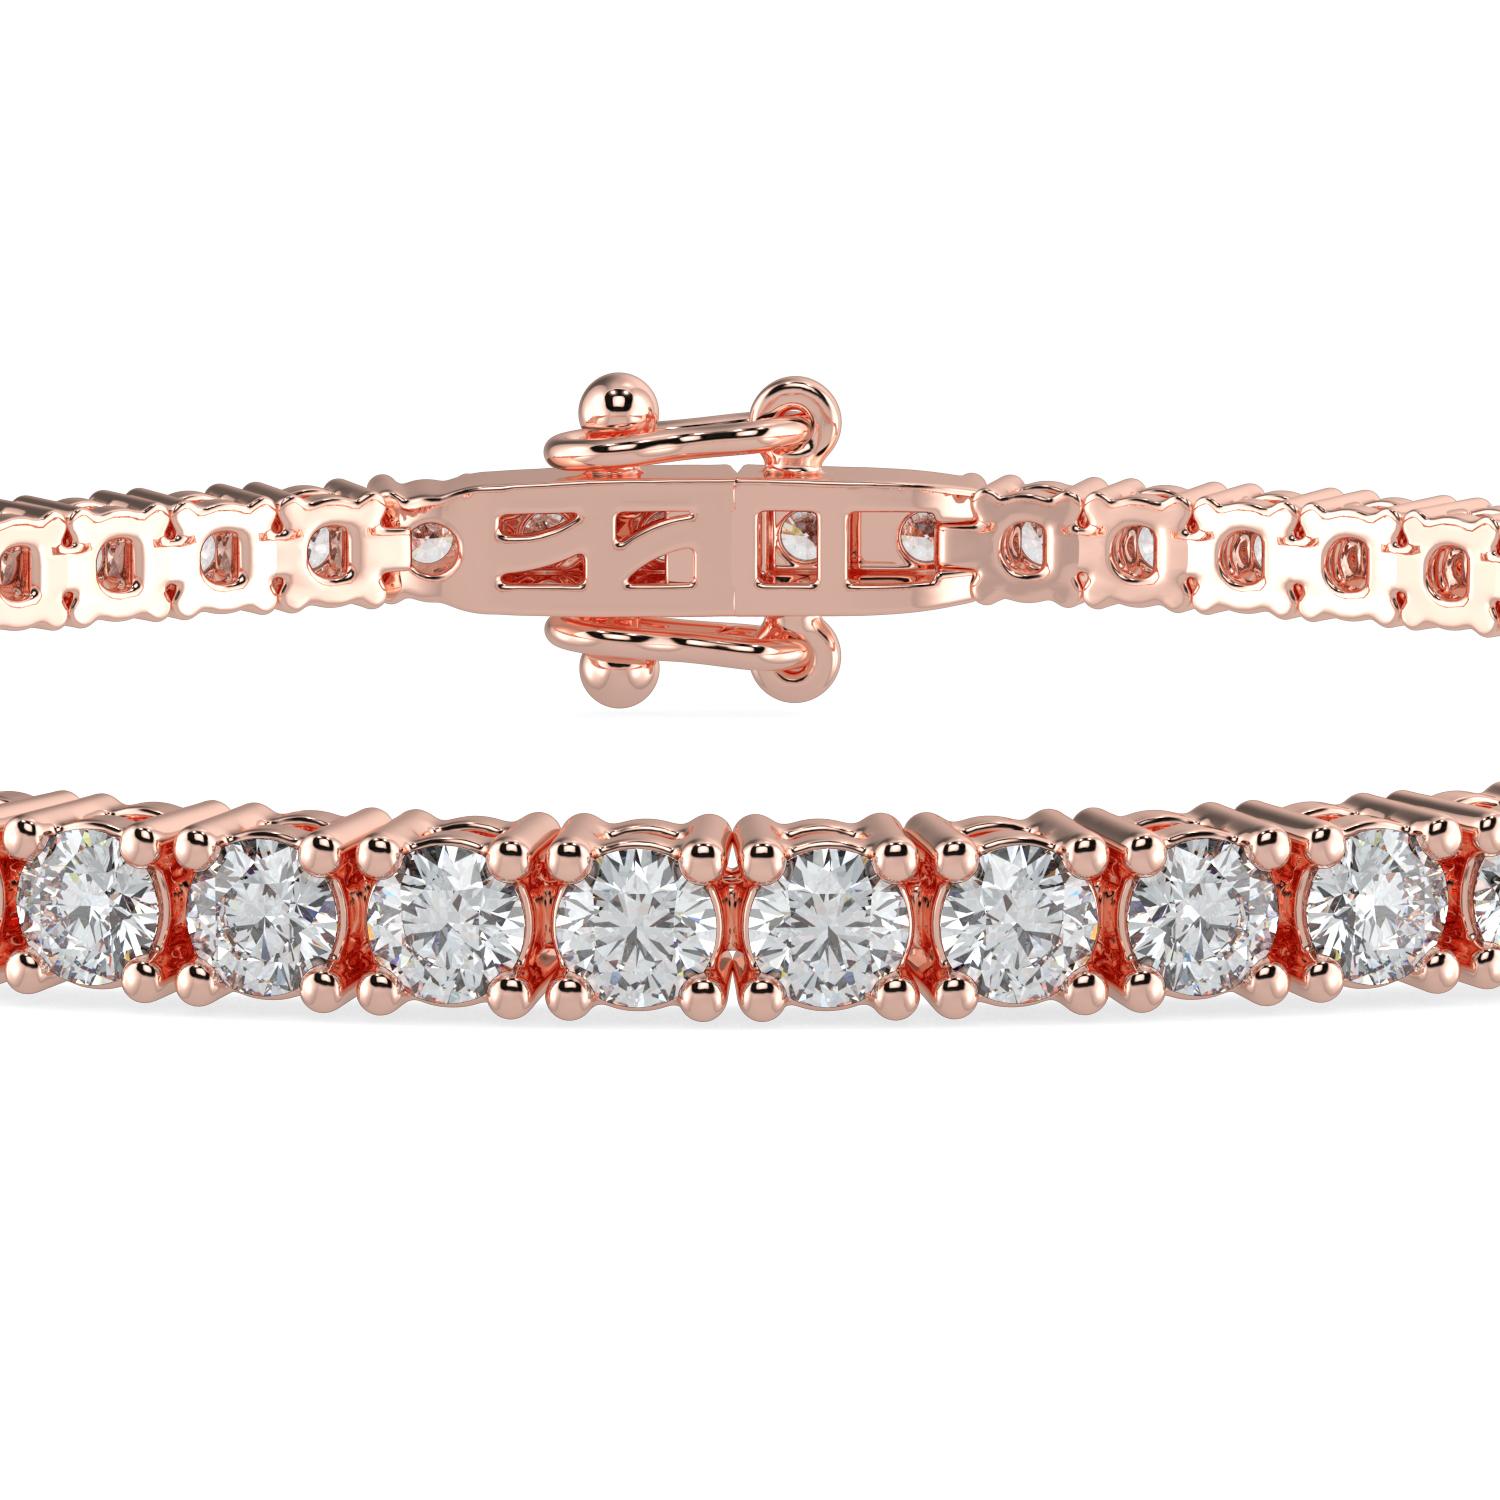 6.00 Carat Round Cut GH-I1 Natural Diamond Classic Tennis Bracelet 4 Prong 14K Rose Gold for Women

Specification
Brand: AAMIAA
Length: 7 Inches 
Color: GH
Carat Weight:6CTW
Clarity: I1

LUXURIOUS AND LASTING- Our bracelets are a luxurious and